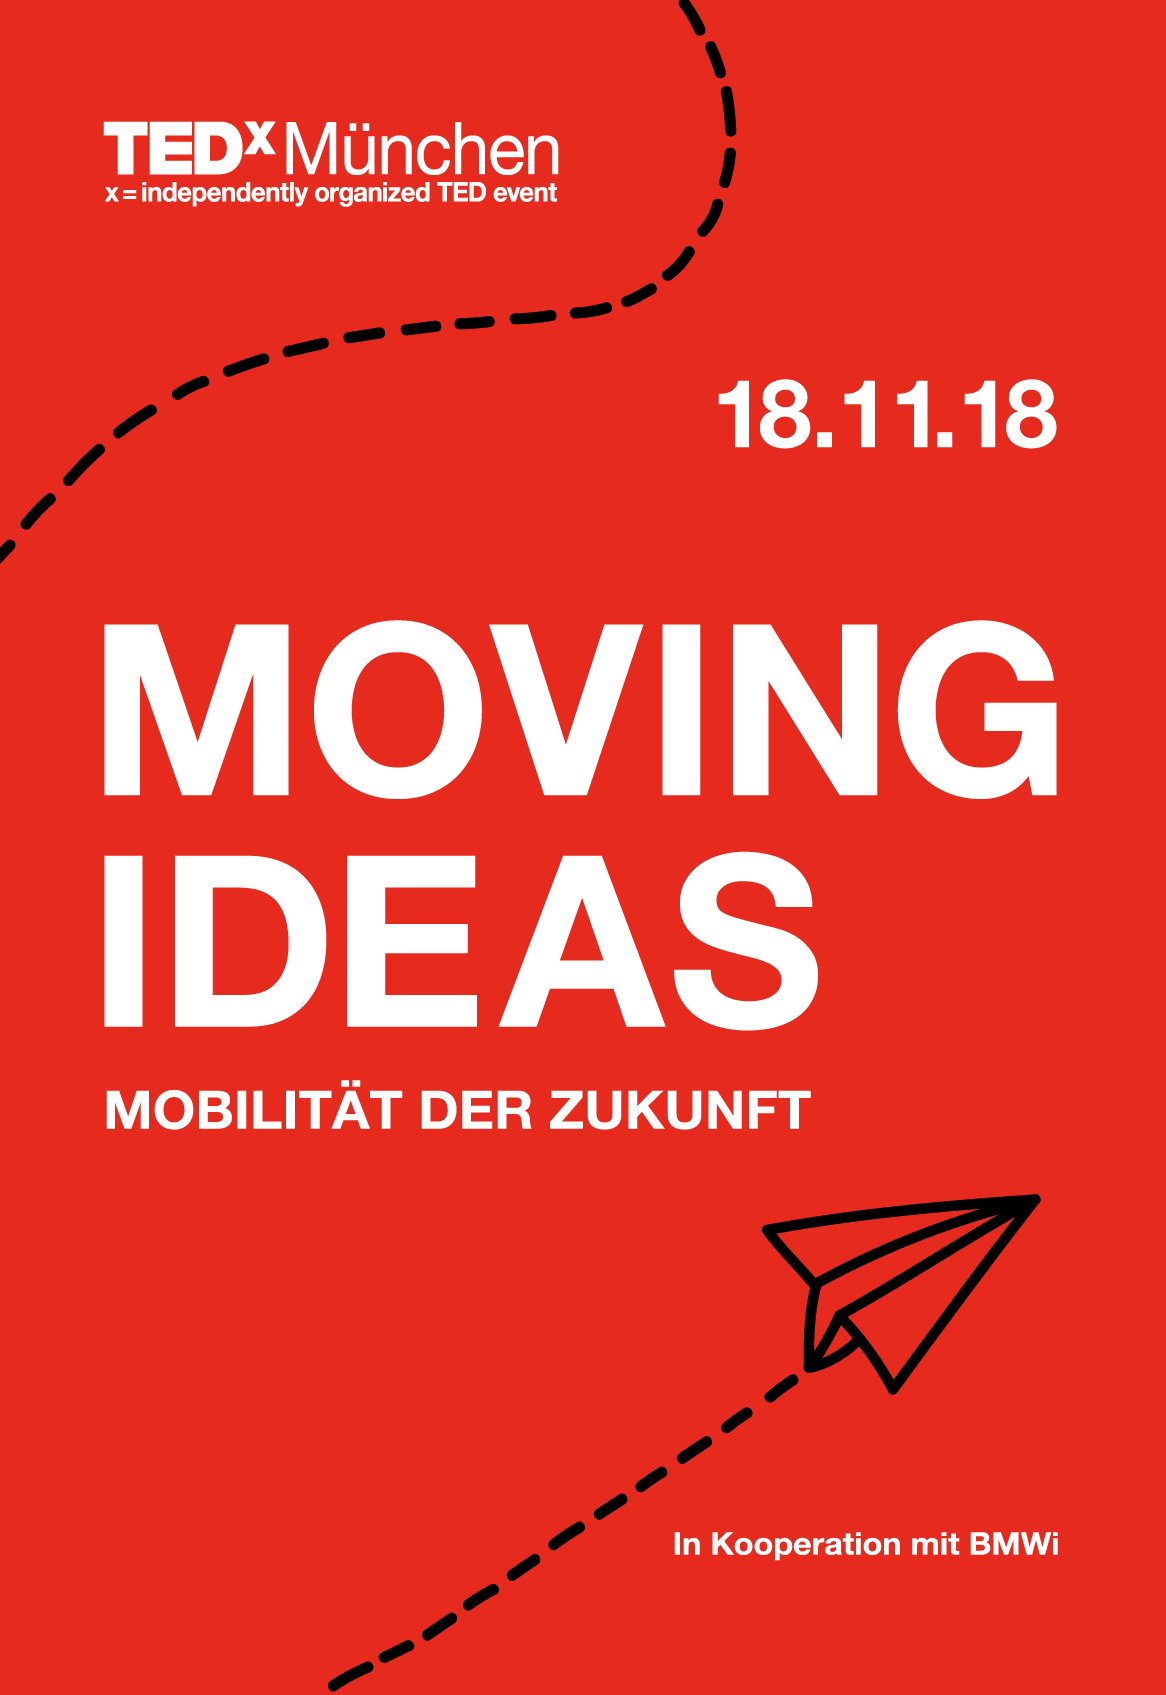 Poster for an event within TEDx Munich 2018